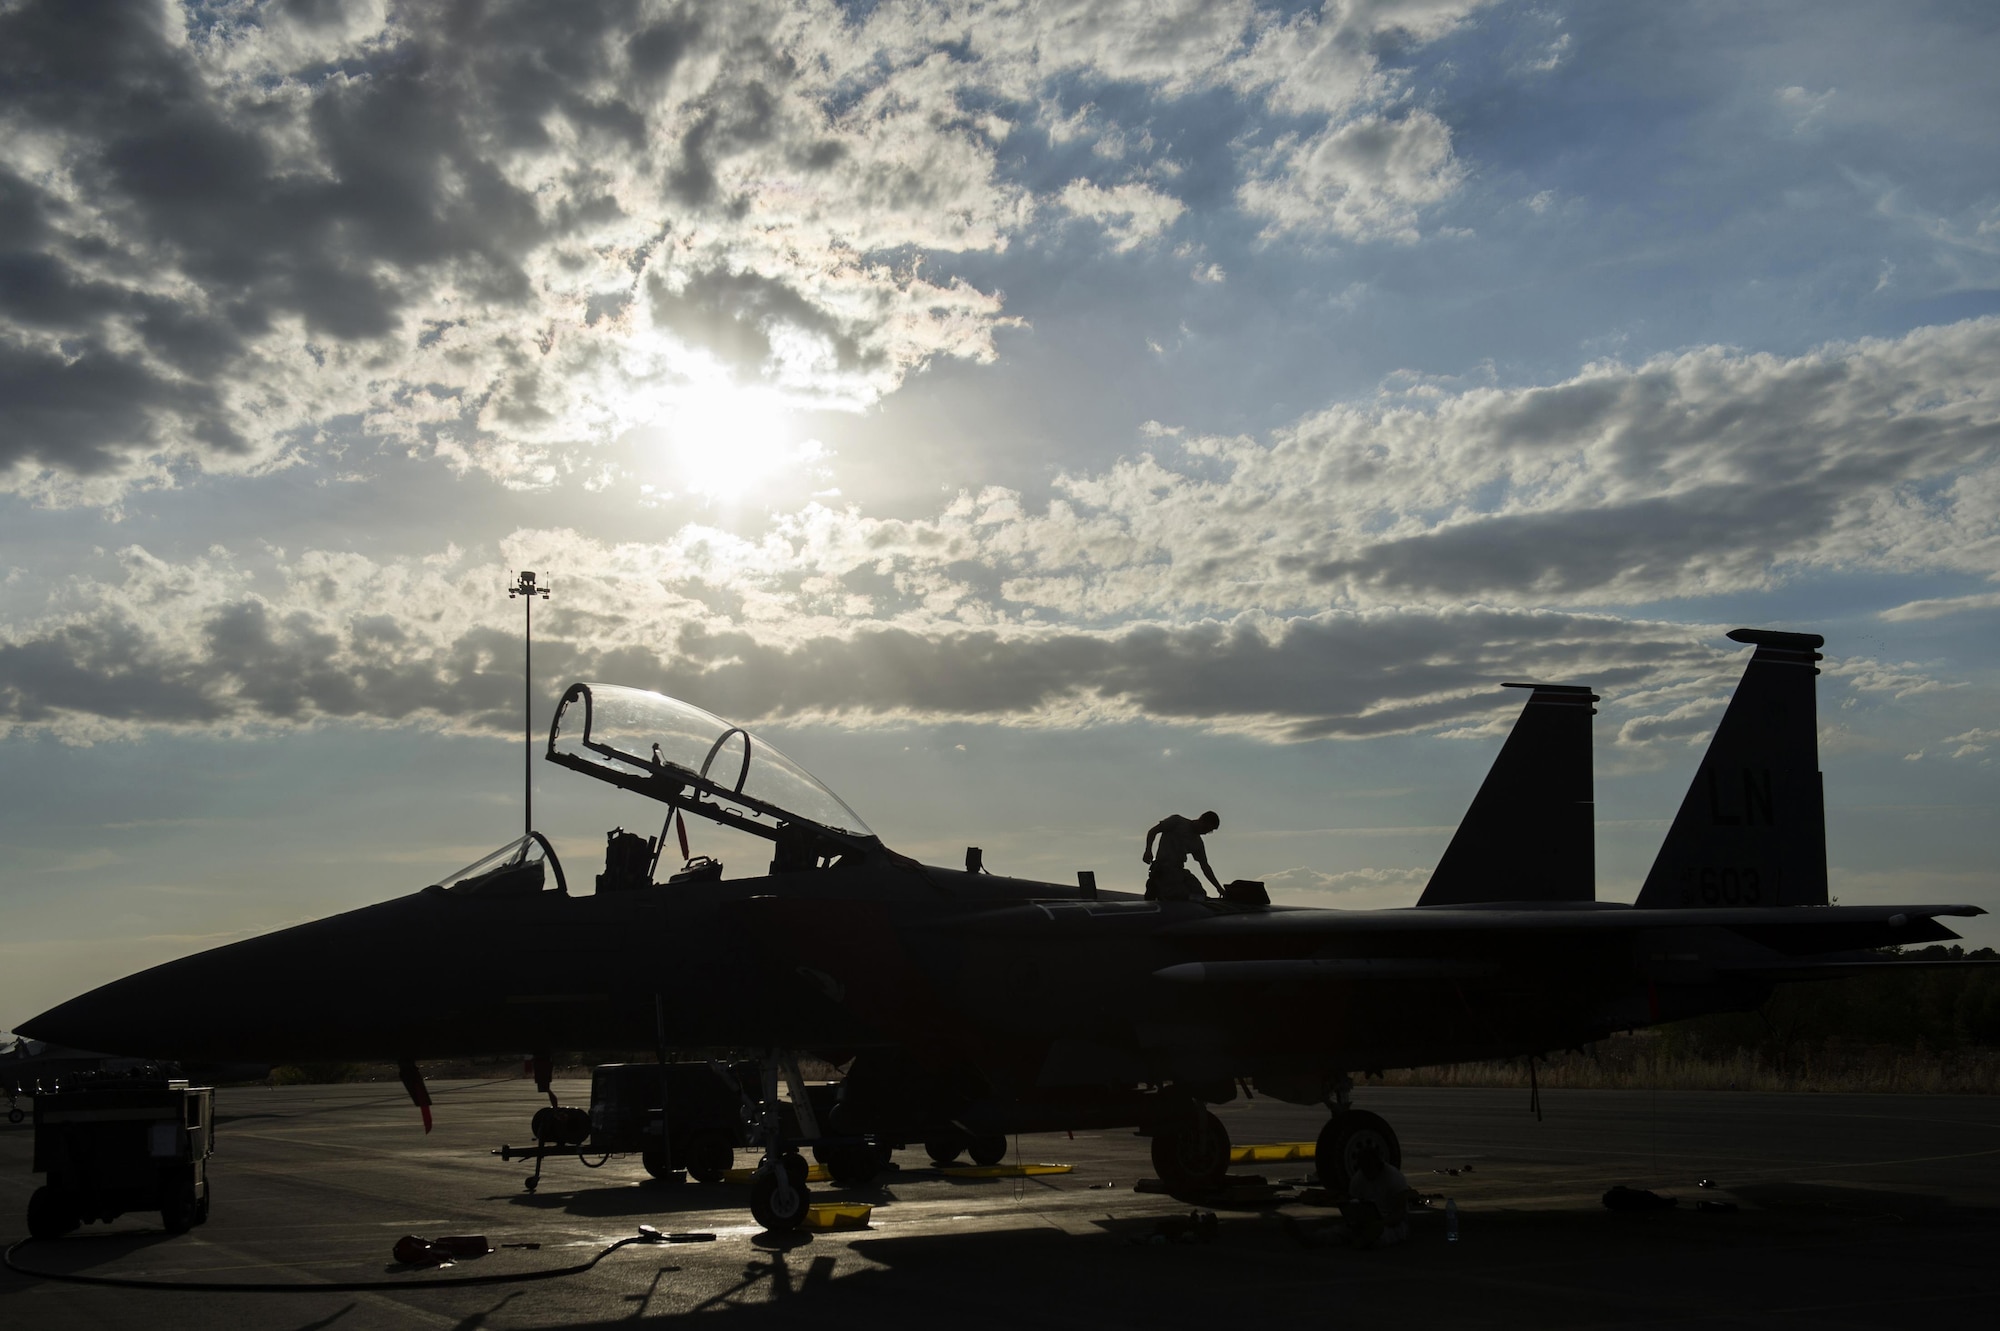 U.S. Air Force Airman 1st Class James Metcalfe, 48th Aircraft Maintenance Squadron dedicated crew chief, inspects an F-15E Strike Eagle after a sortie in support of Tactical Leadership Programme 16-3 at Los Llanos Air Base, Spain, Sept. 22. Training programs like TLP showcase how the U.S. works side-by-side with NATO allies and partners every day, training to meet future security challenges as a unified force. (U.S. Air Force photo/ Staff Sgt. Emerson Nuñez)